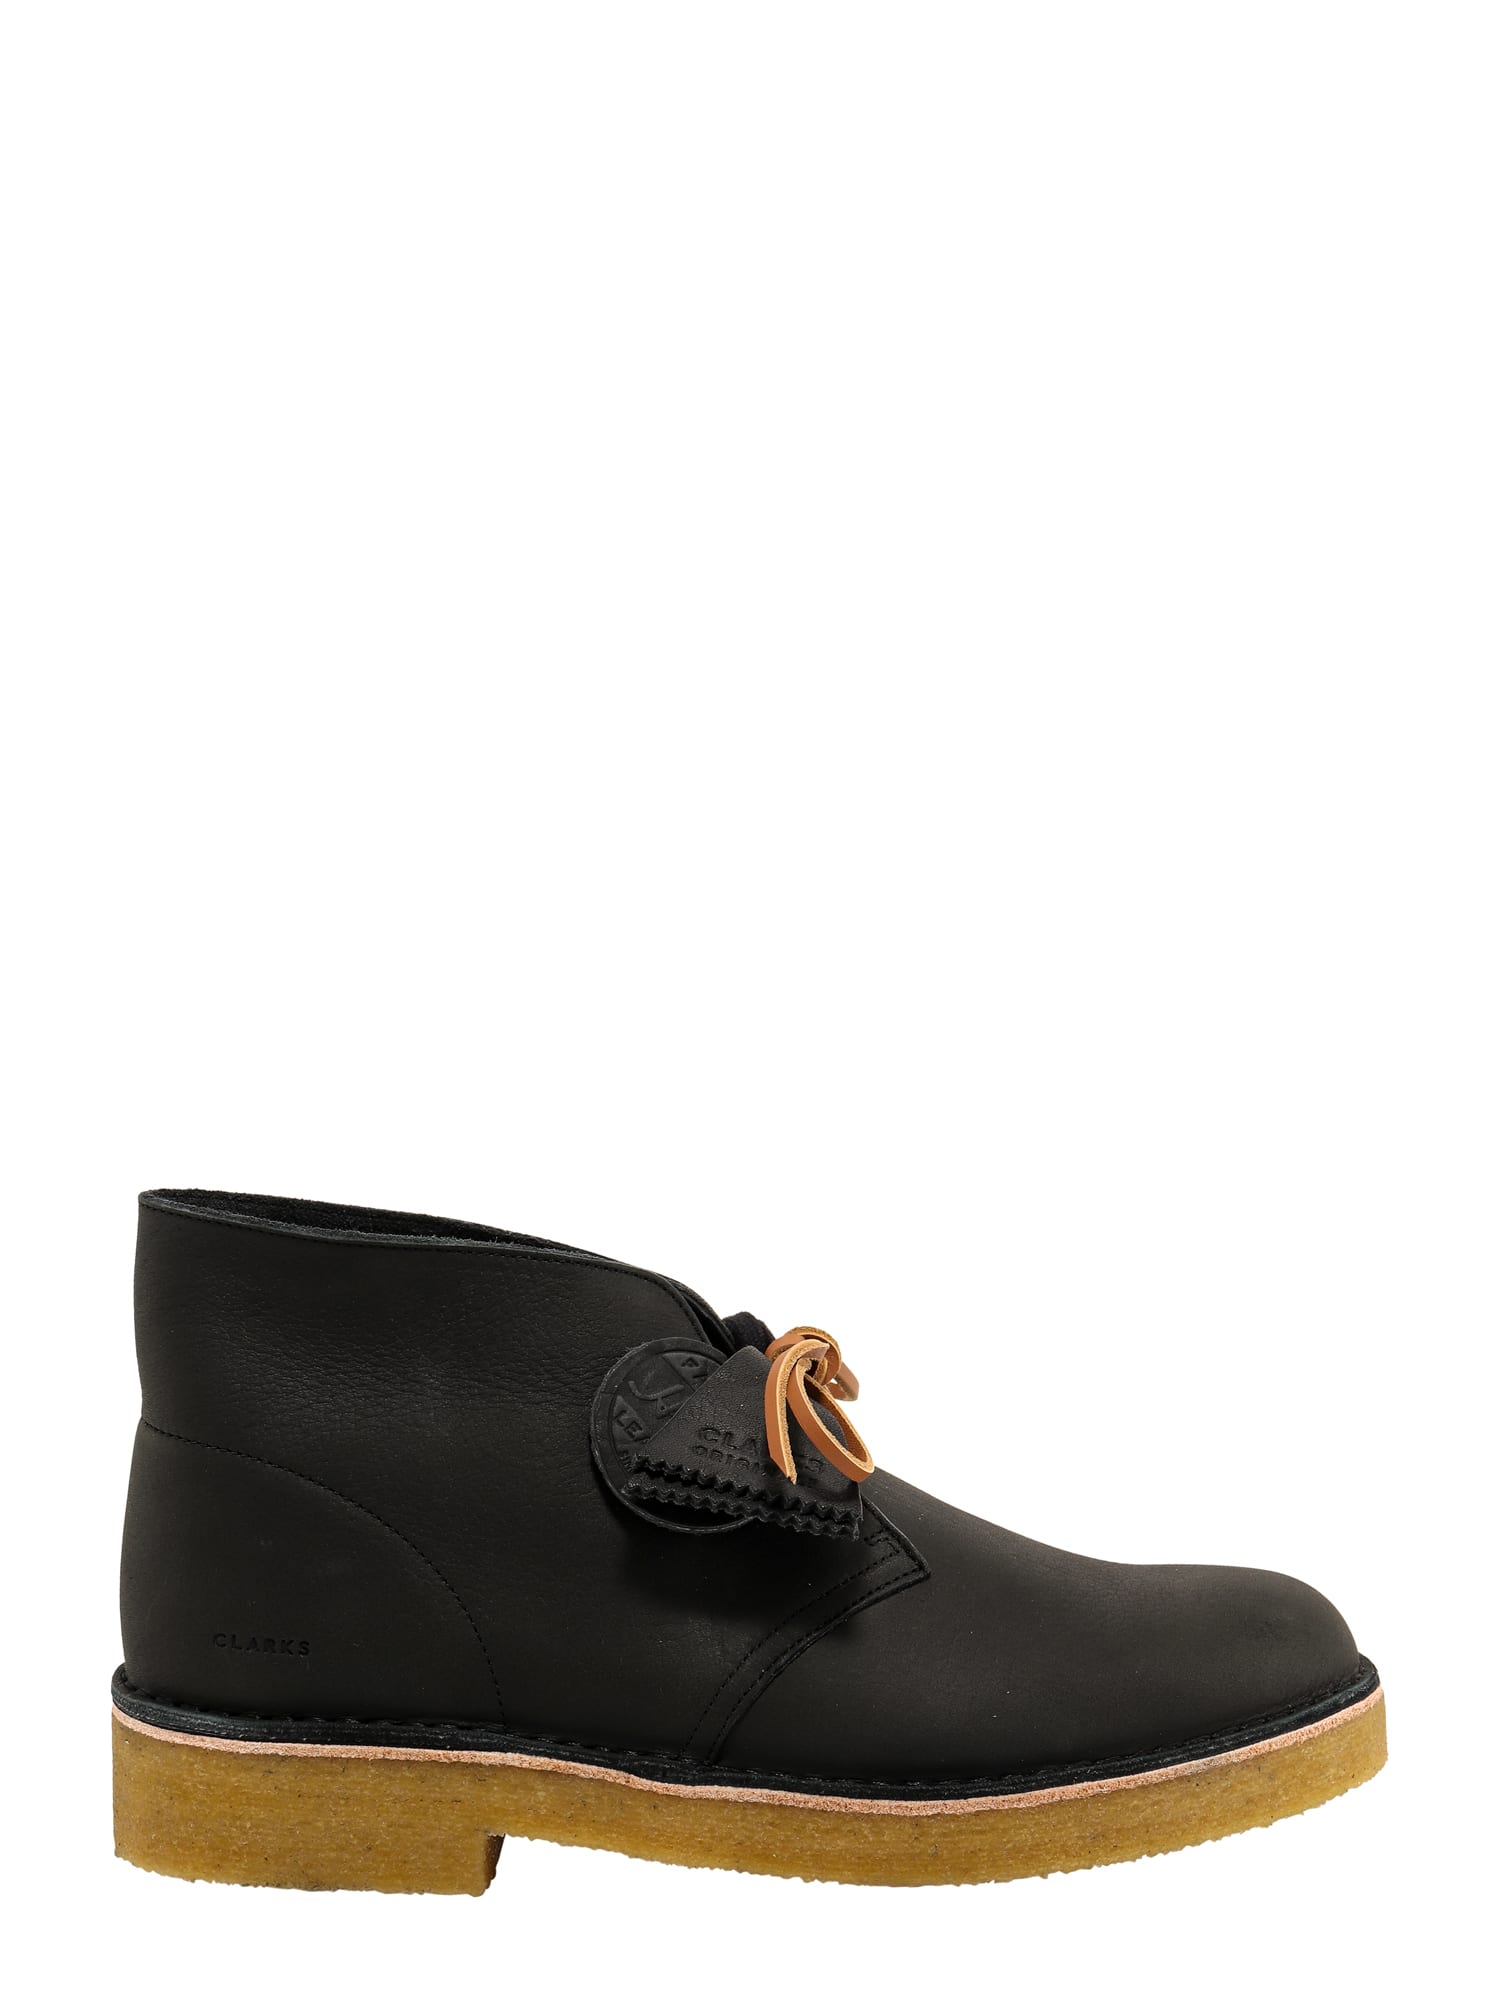 Clarks Desert Boot221 Lace-up Shoe